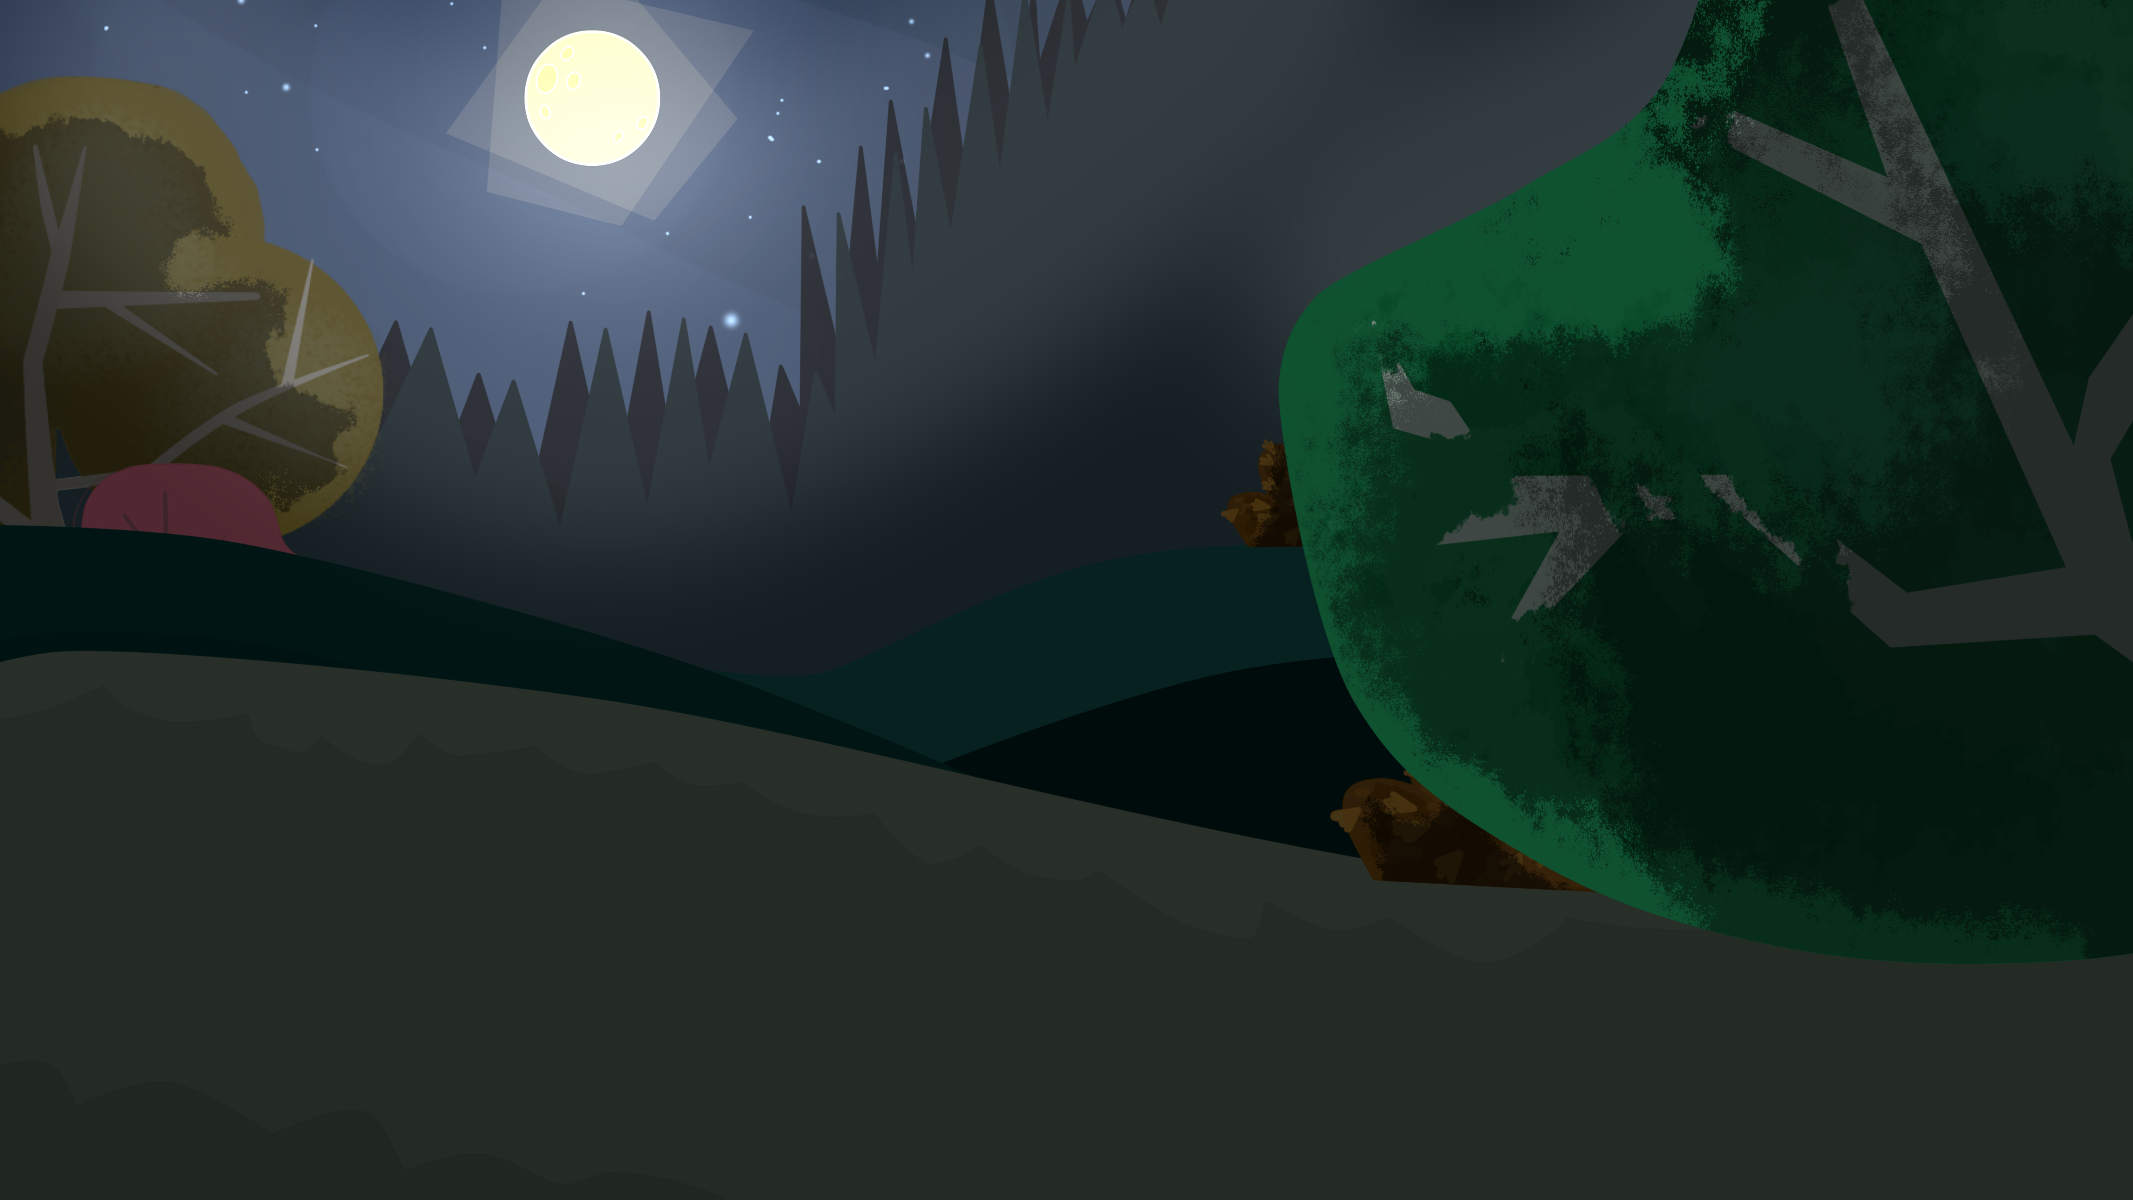 Total Drama Background Night Forest By MiguelAmshelo On DeviantArt